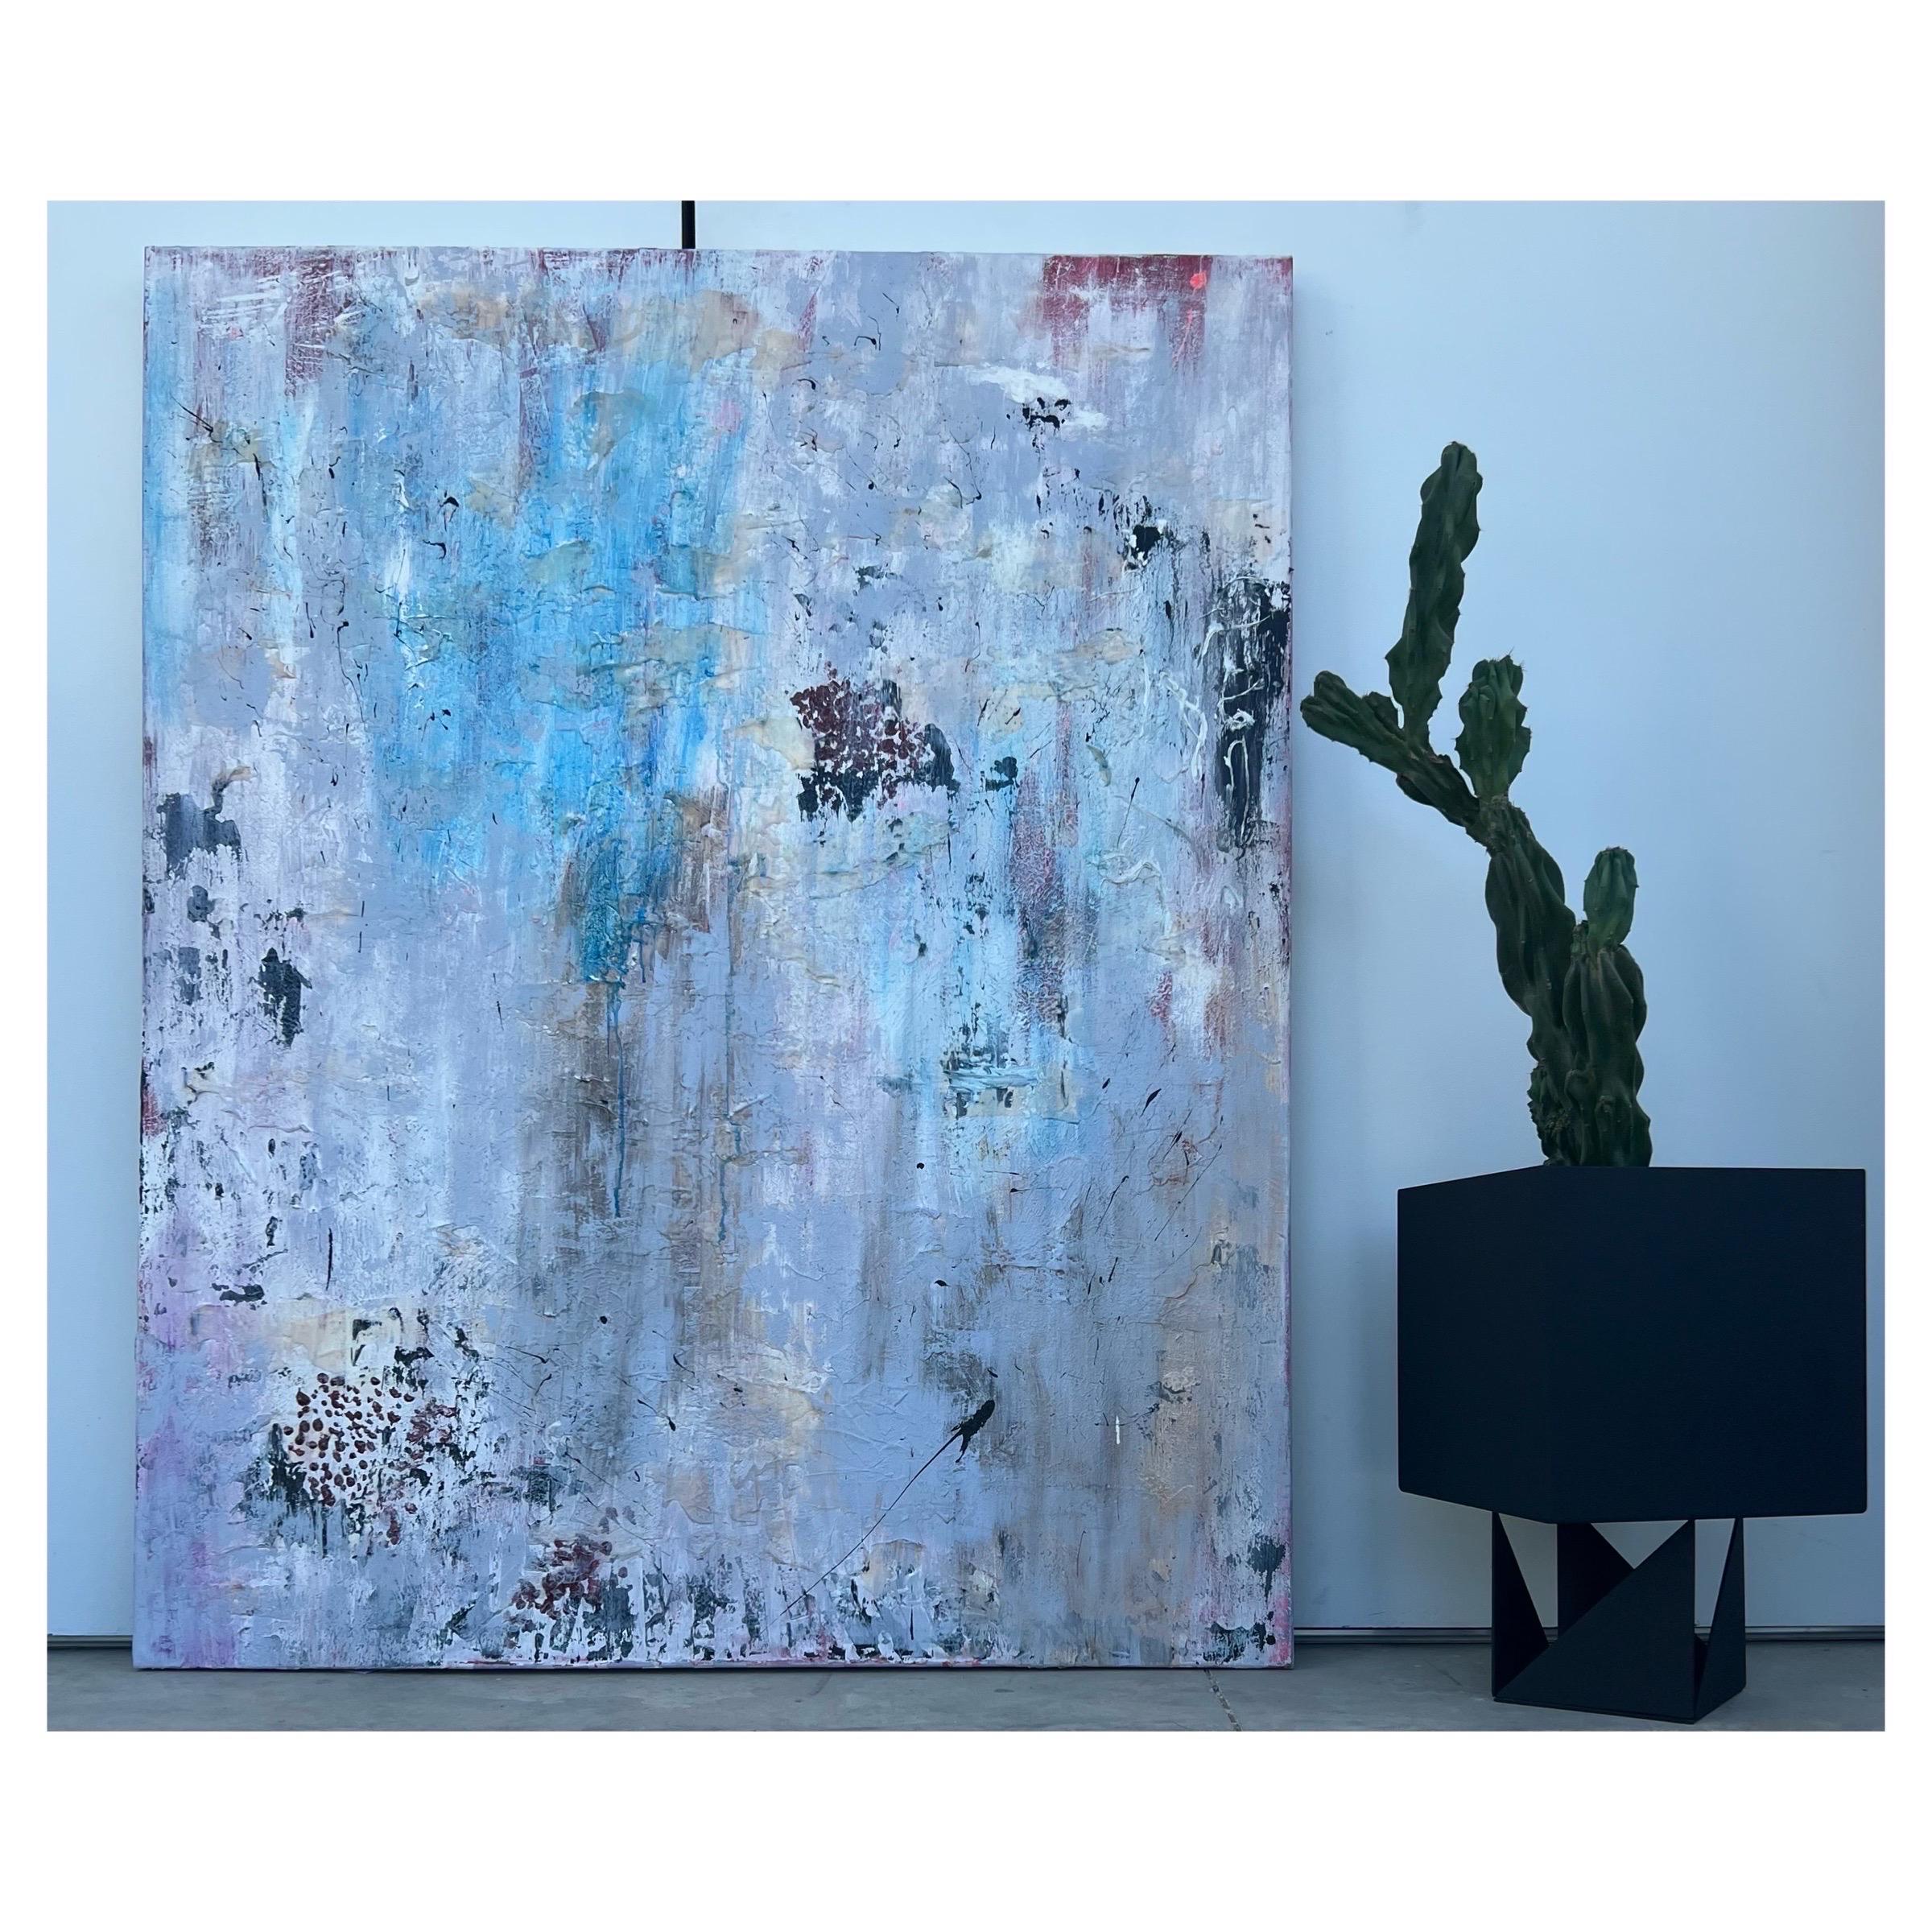 Highly textured new abstract artwork. Mixed media: acrylic, India ink, and cotton string. Neutral color story with pops of color.